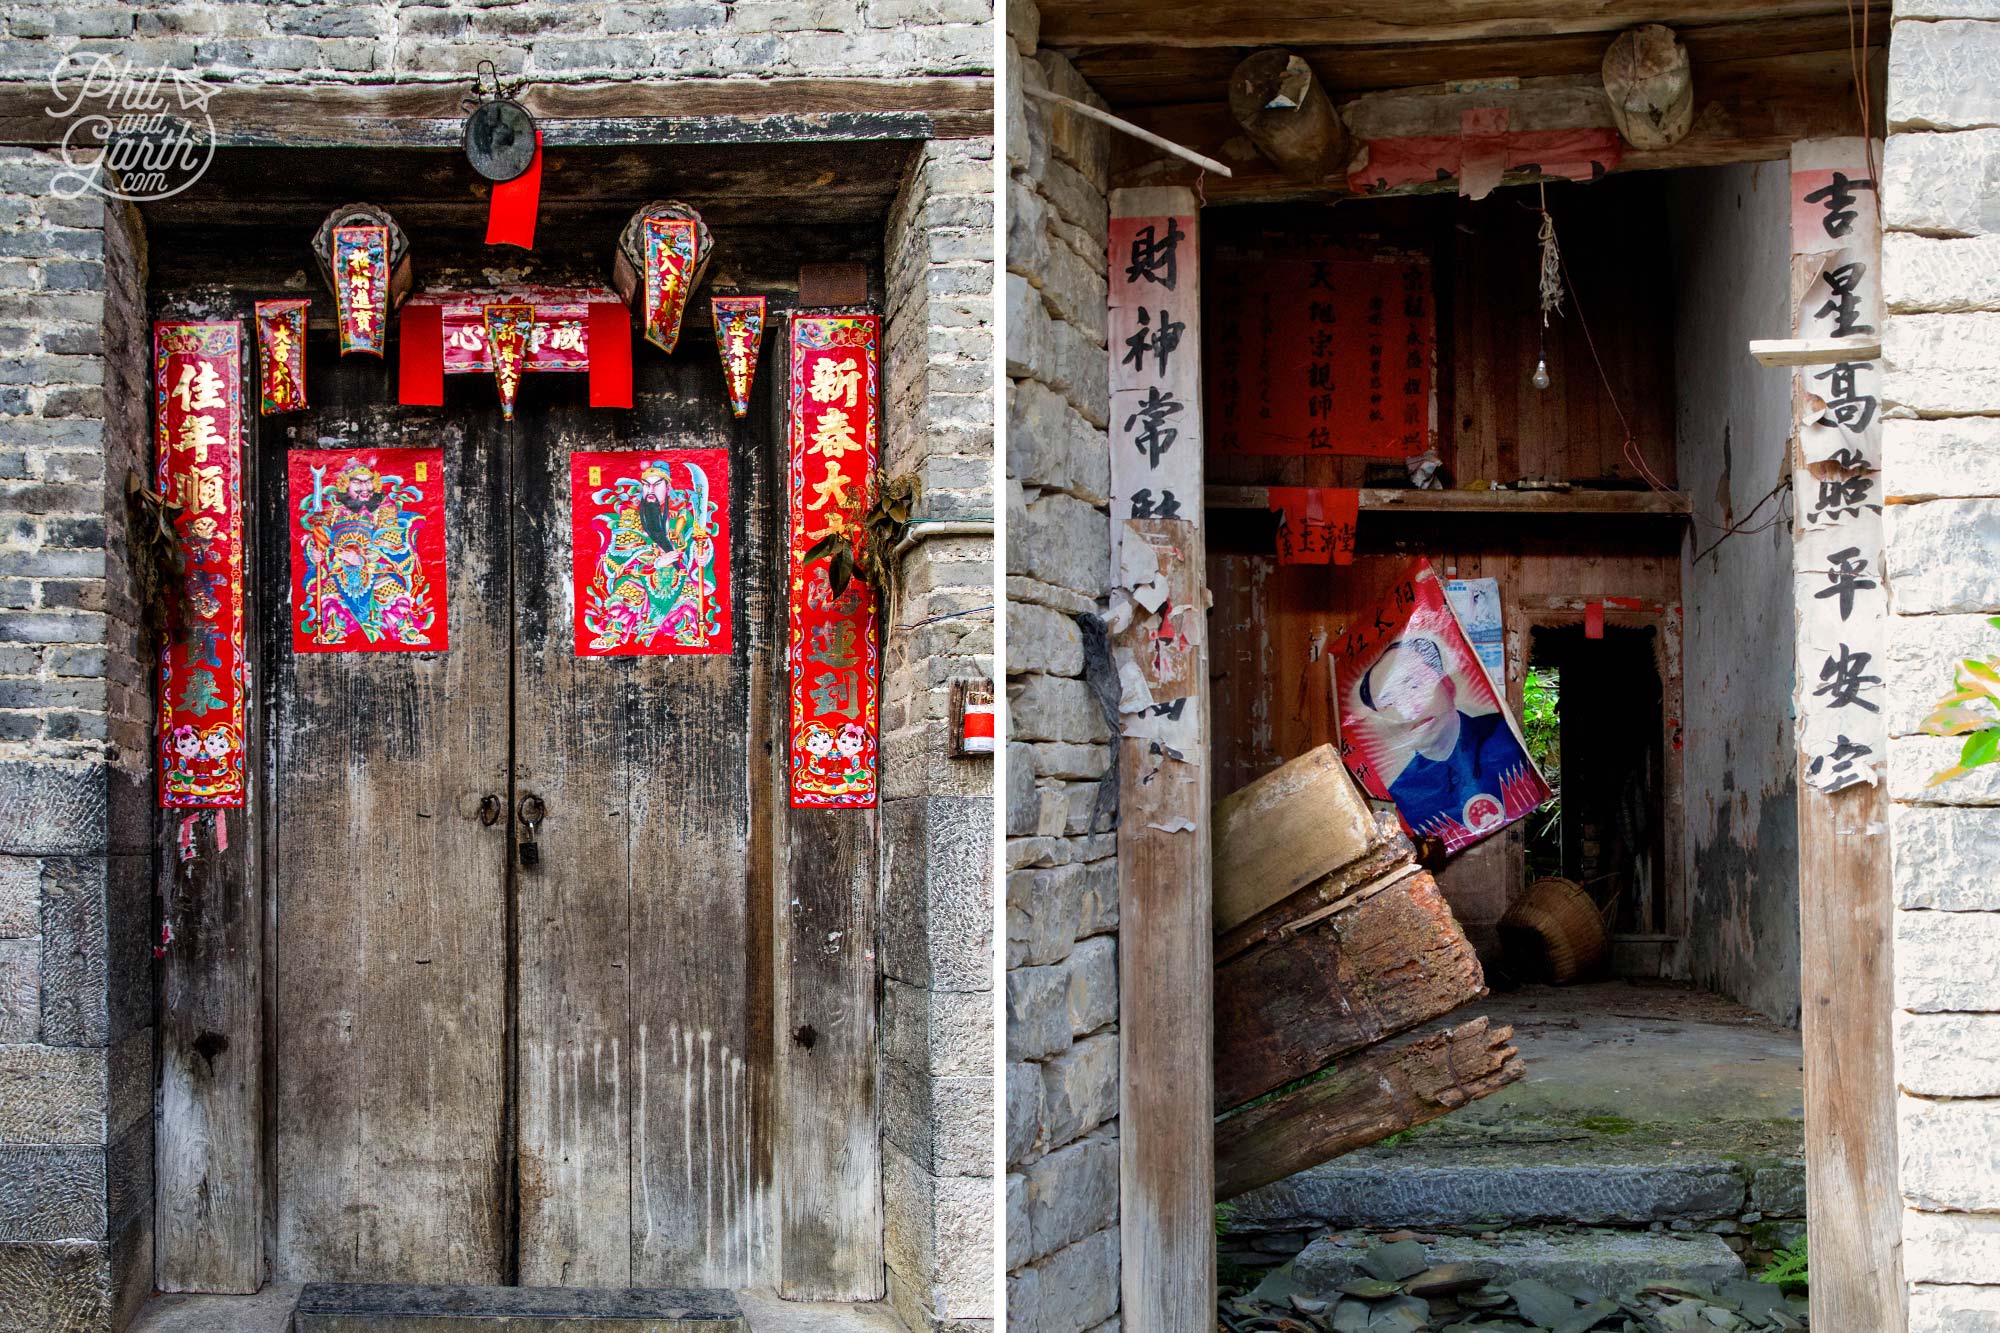 Chinese good luck phrases decorate the doors